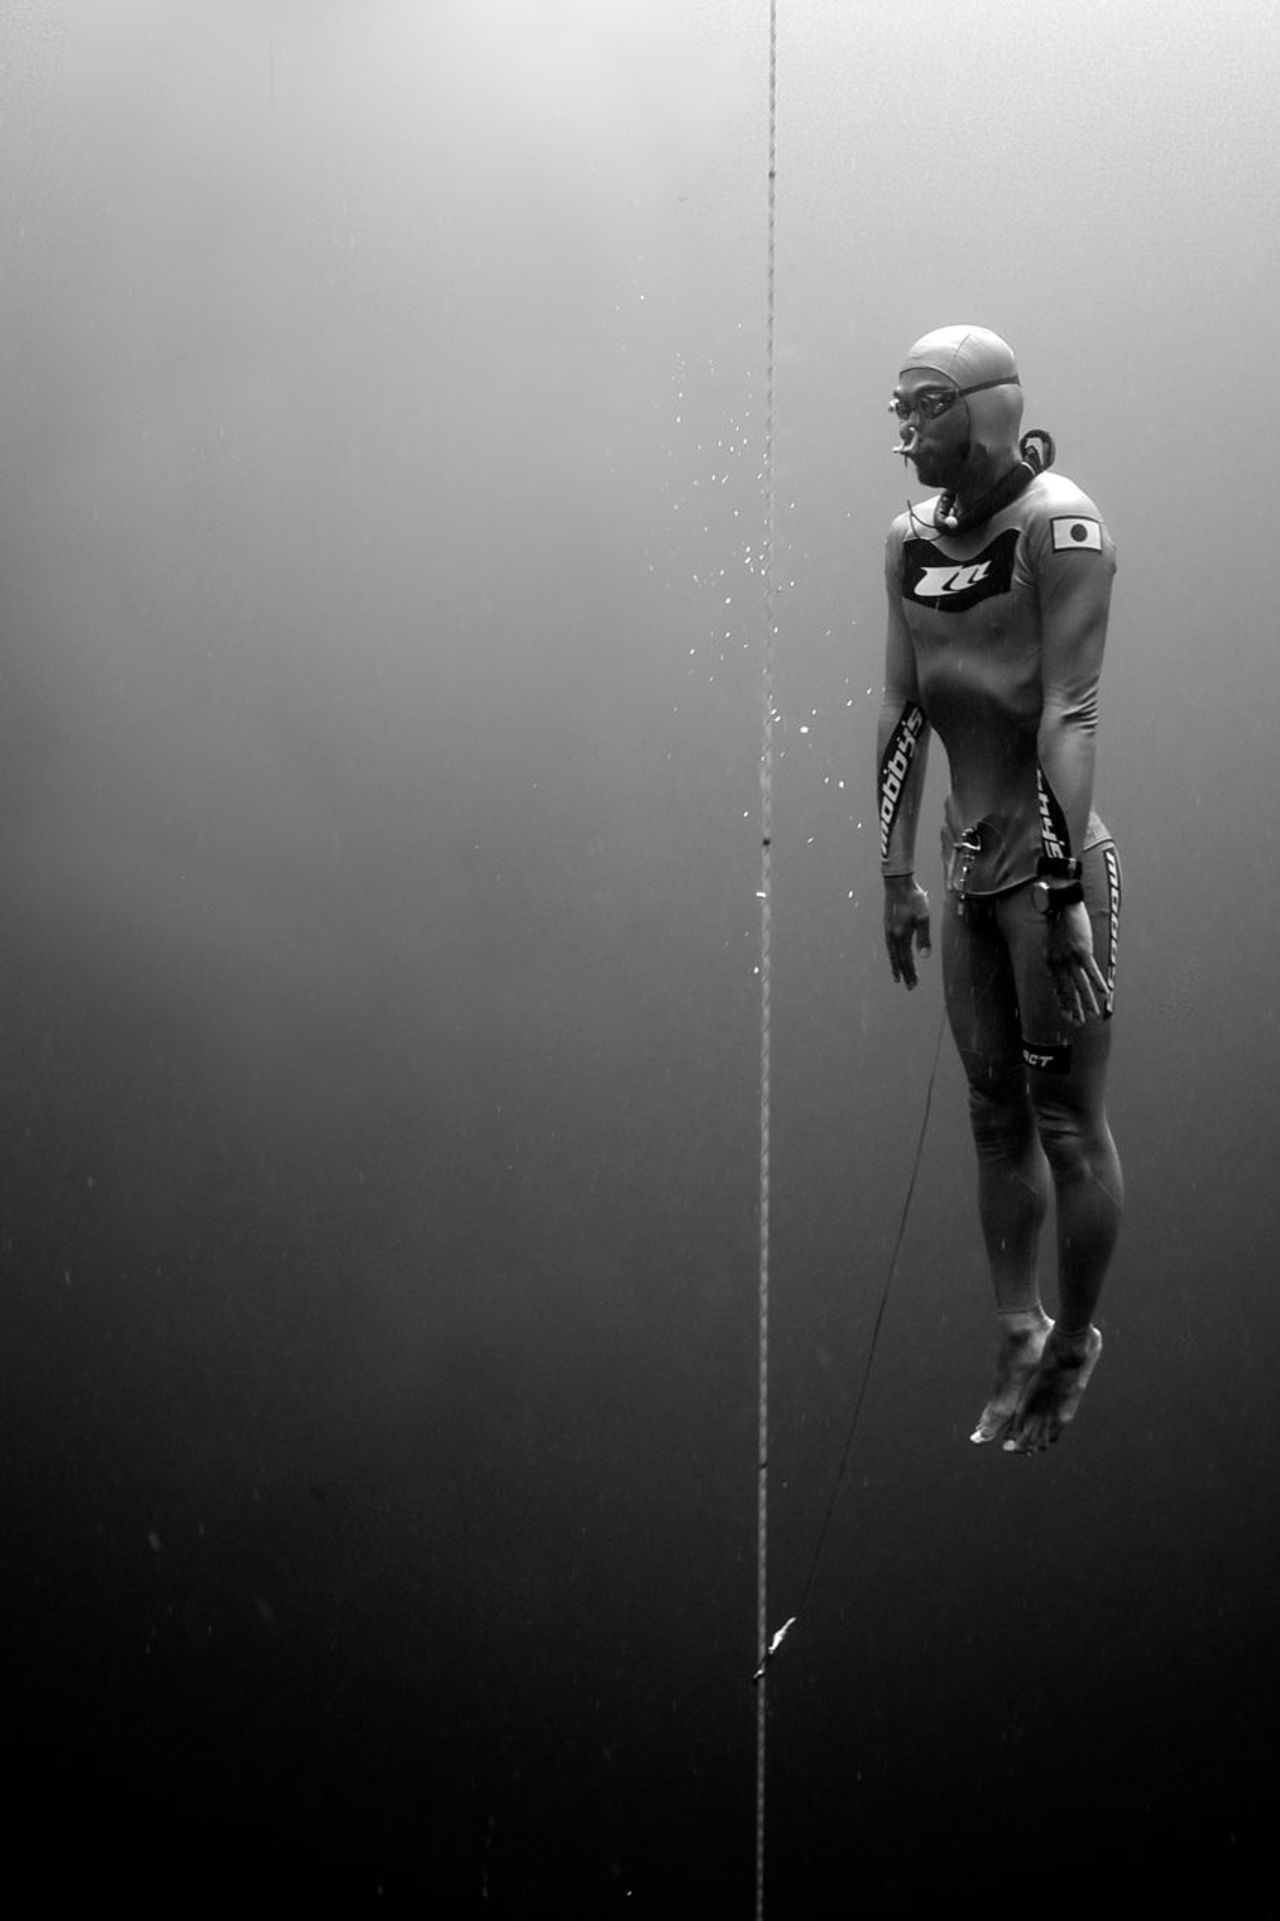 "When the dive starts, you take as big a breath as possible. The deeper you go, the more your lungs are compressed. Past 20 meters you become negatively buoyant, you enter into free fall, and you can just drop into the blue," said Trubridge, adding: "On the way up you have to work to counteract that, you have to swim extra hard."